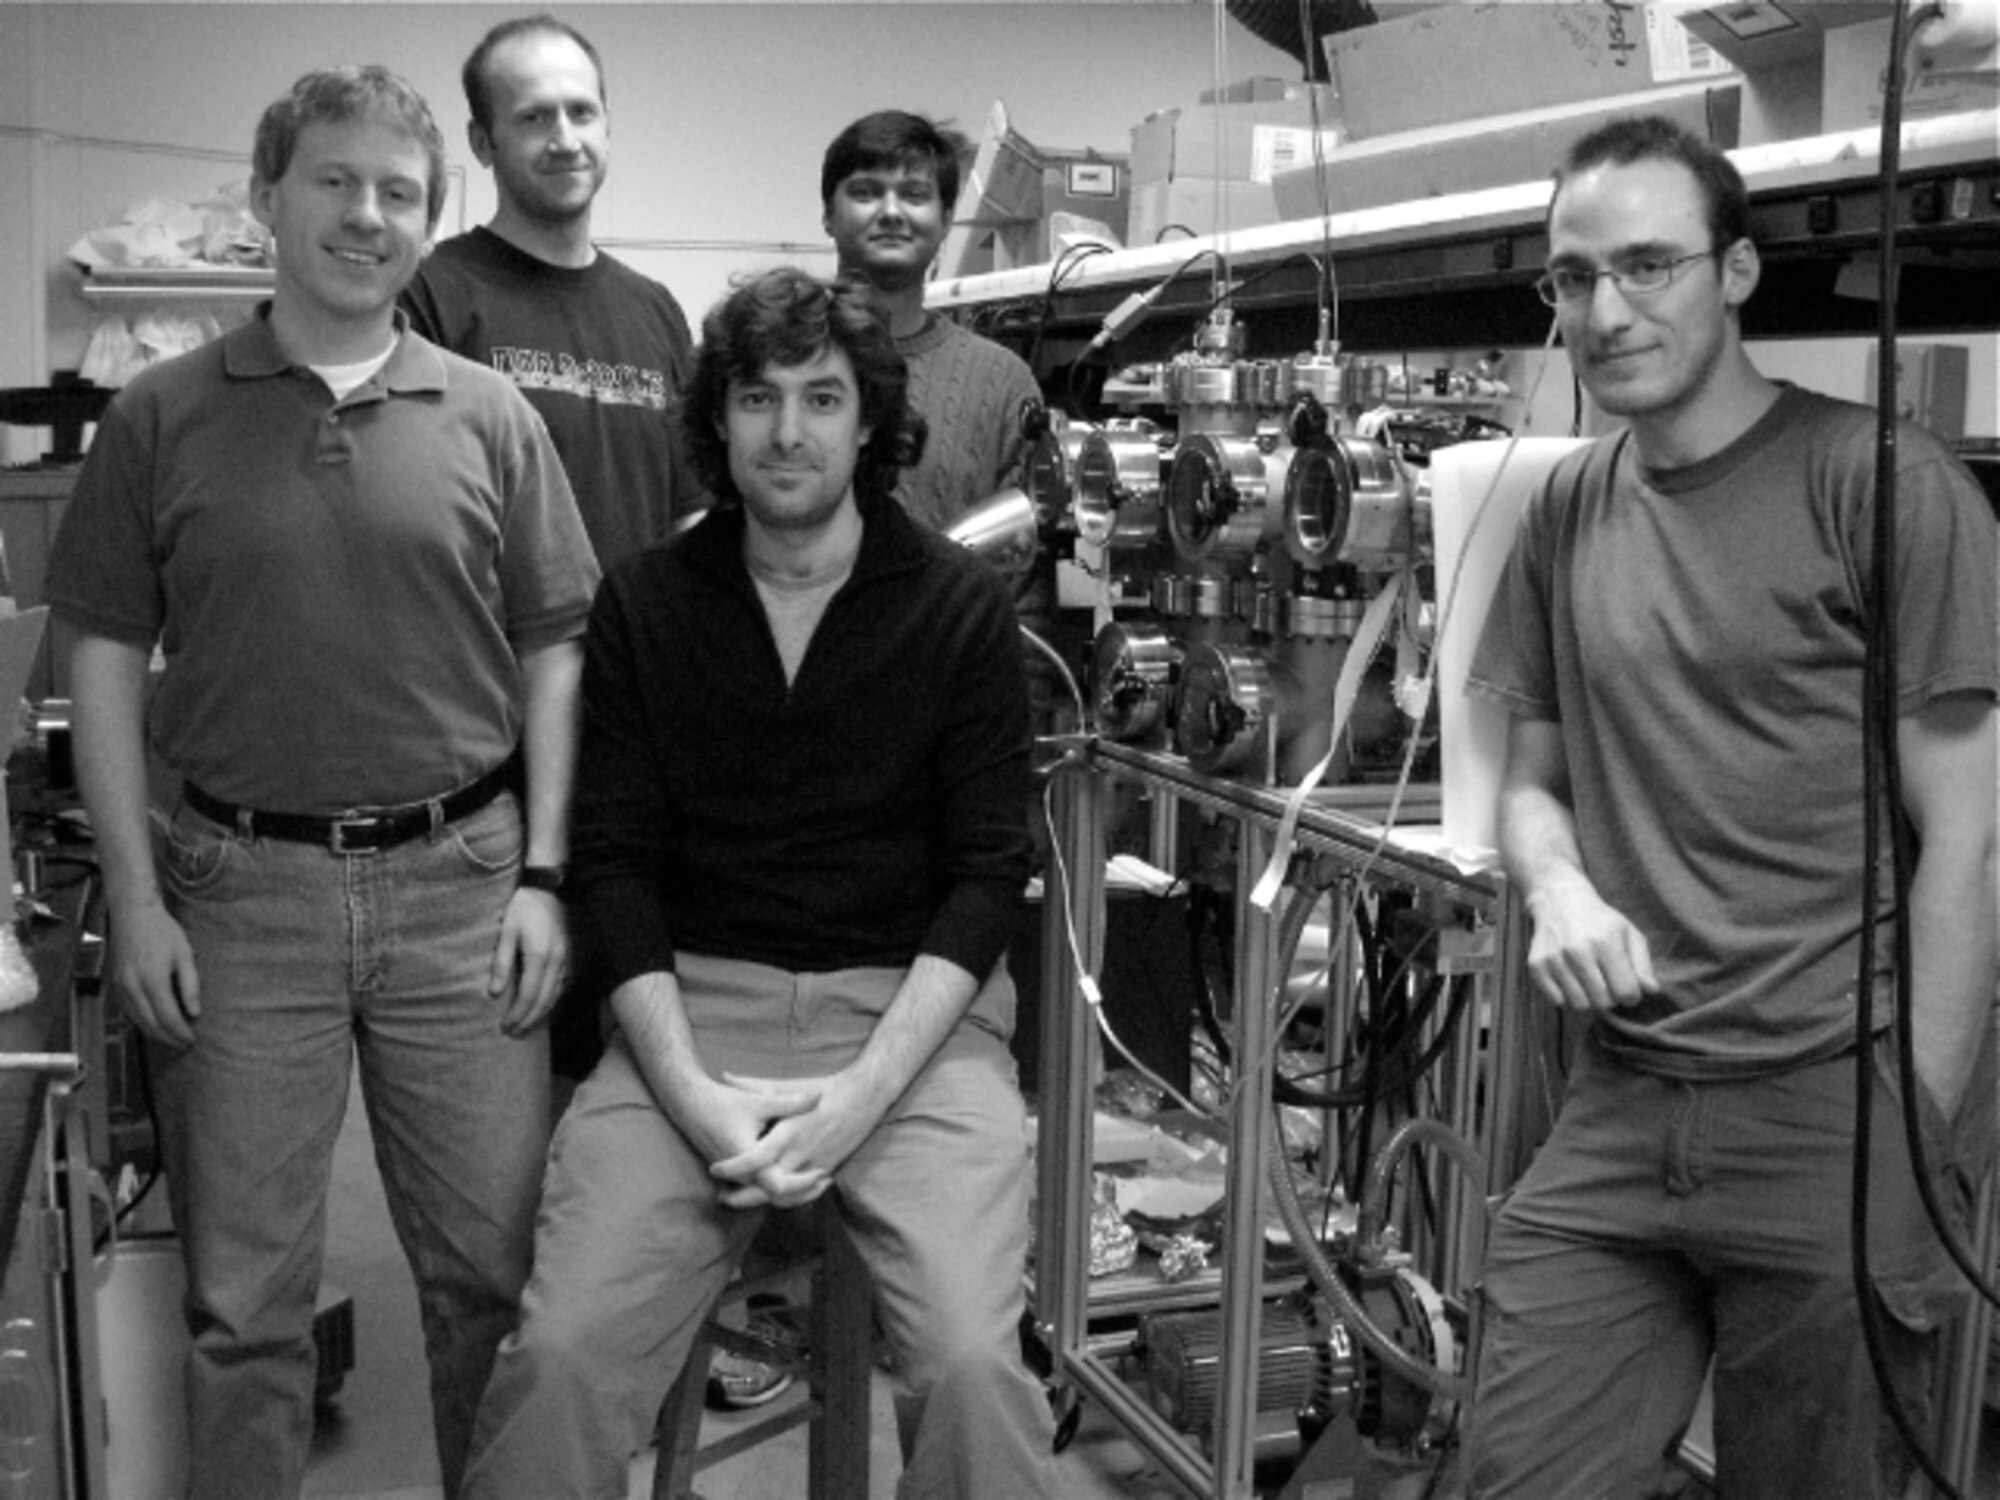 With AFOSR funding, a team from the University of Michigan is working on a project to integrate solar power cheaply and easily into the base materials used to build UAVs. The team is pictured above posing around a customized reel-to-reel coating apparatus they developed for making large quantities of fiber-based energy conversion devices. 

(Center) Max Shtein, an assistant professor working on optoelectronic materials and devices, thin-film processing 

(Left to Right) Kevin Pipe, an assistant professor working on thermal phenomena in materials and devices; Brendan O'Connor, a graduate student working on organic solar cells on fibers; Abhishek Yadav, a graduate student working on thermoelectric devices on fibers; and Steven Morris, a graduate student working on reel-to-reel deposition of films and devices on fibers.

(Photo Credit: University of Michigan)